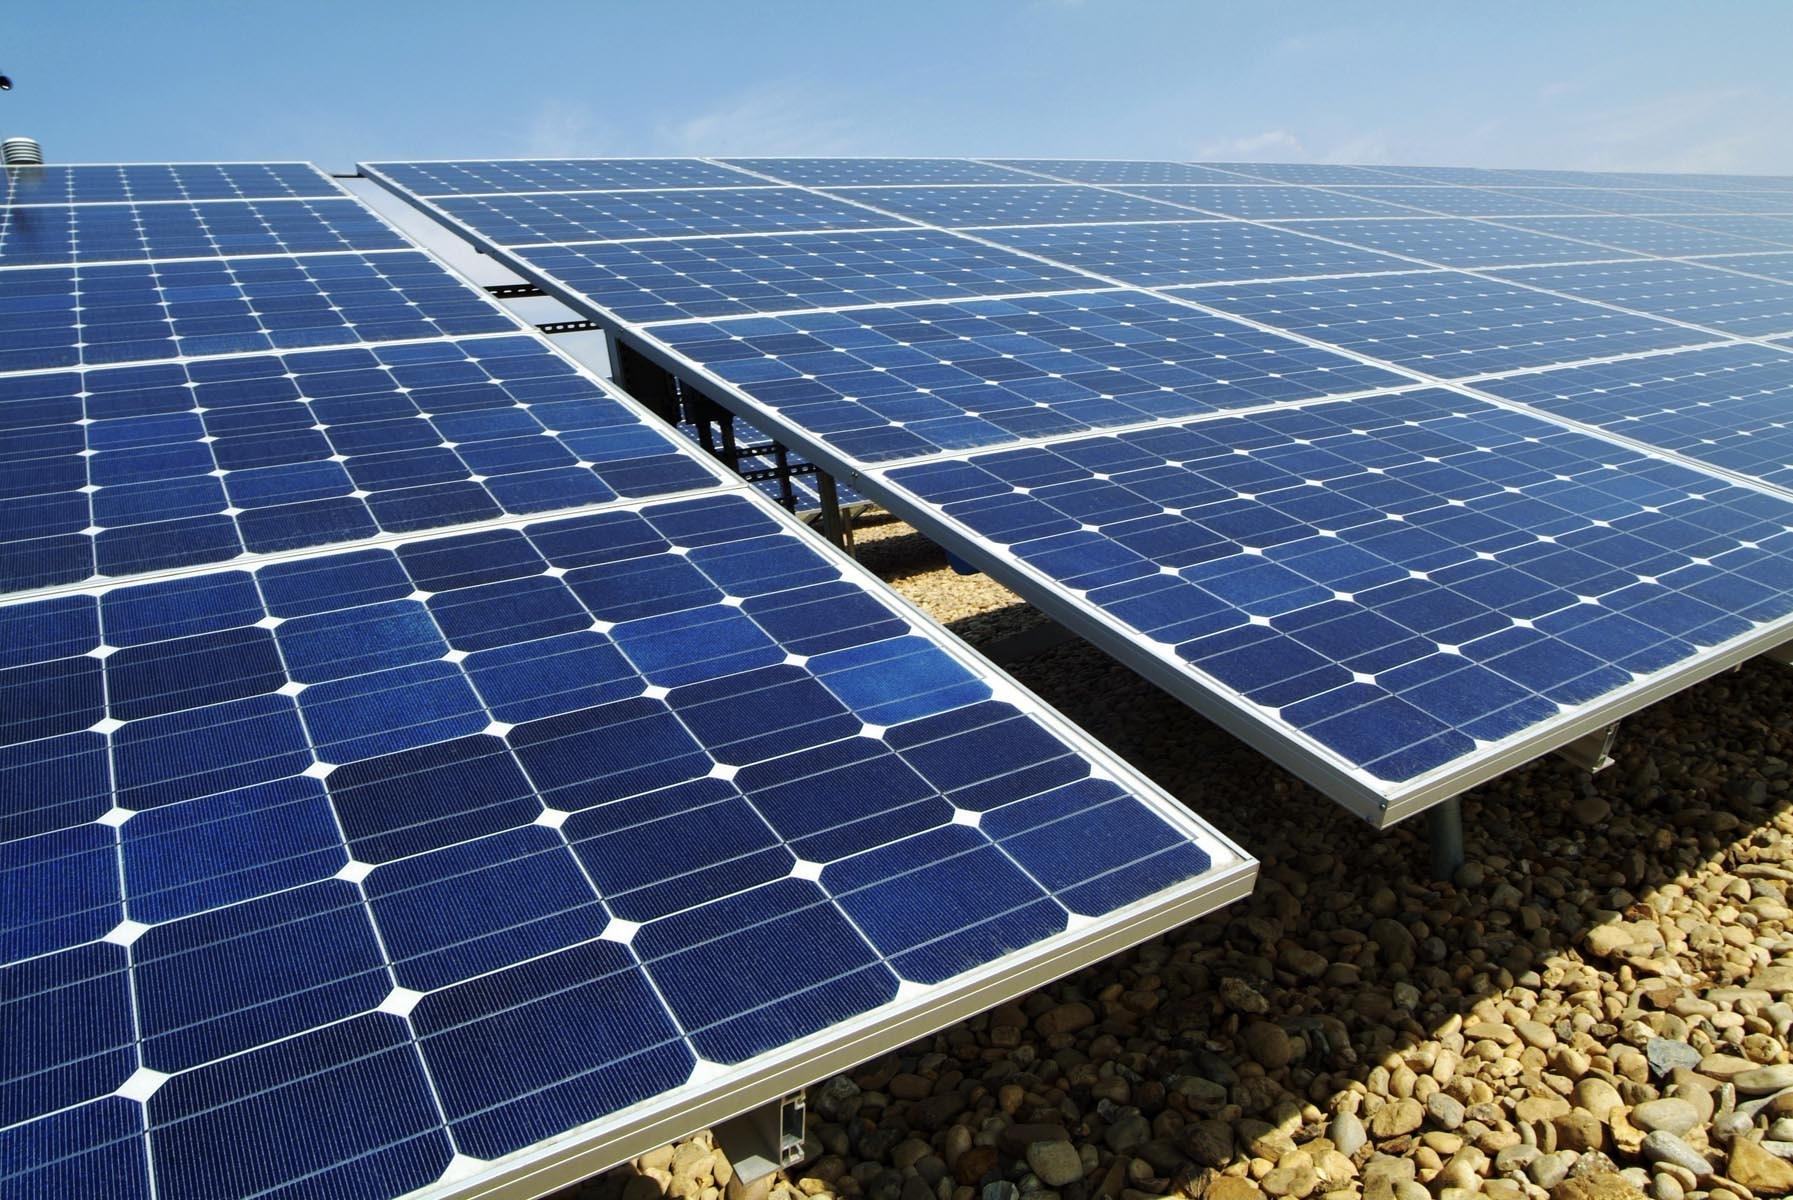 Solar PV to generate US$182B investment in Middle East renewables by